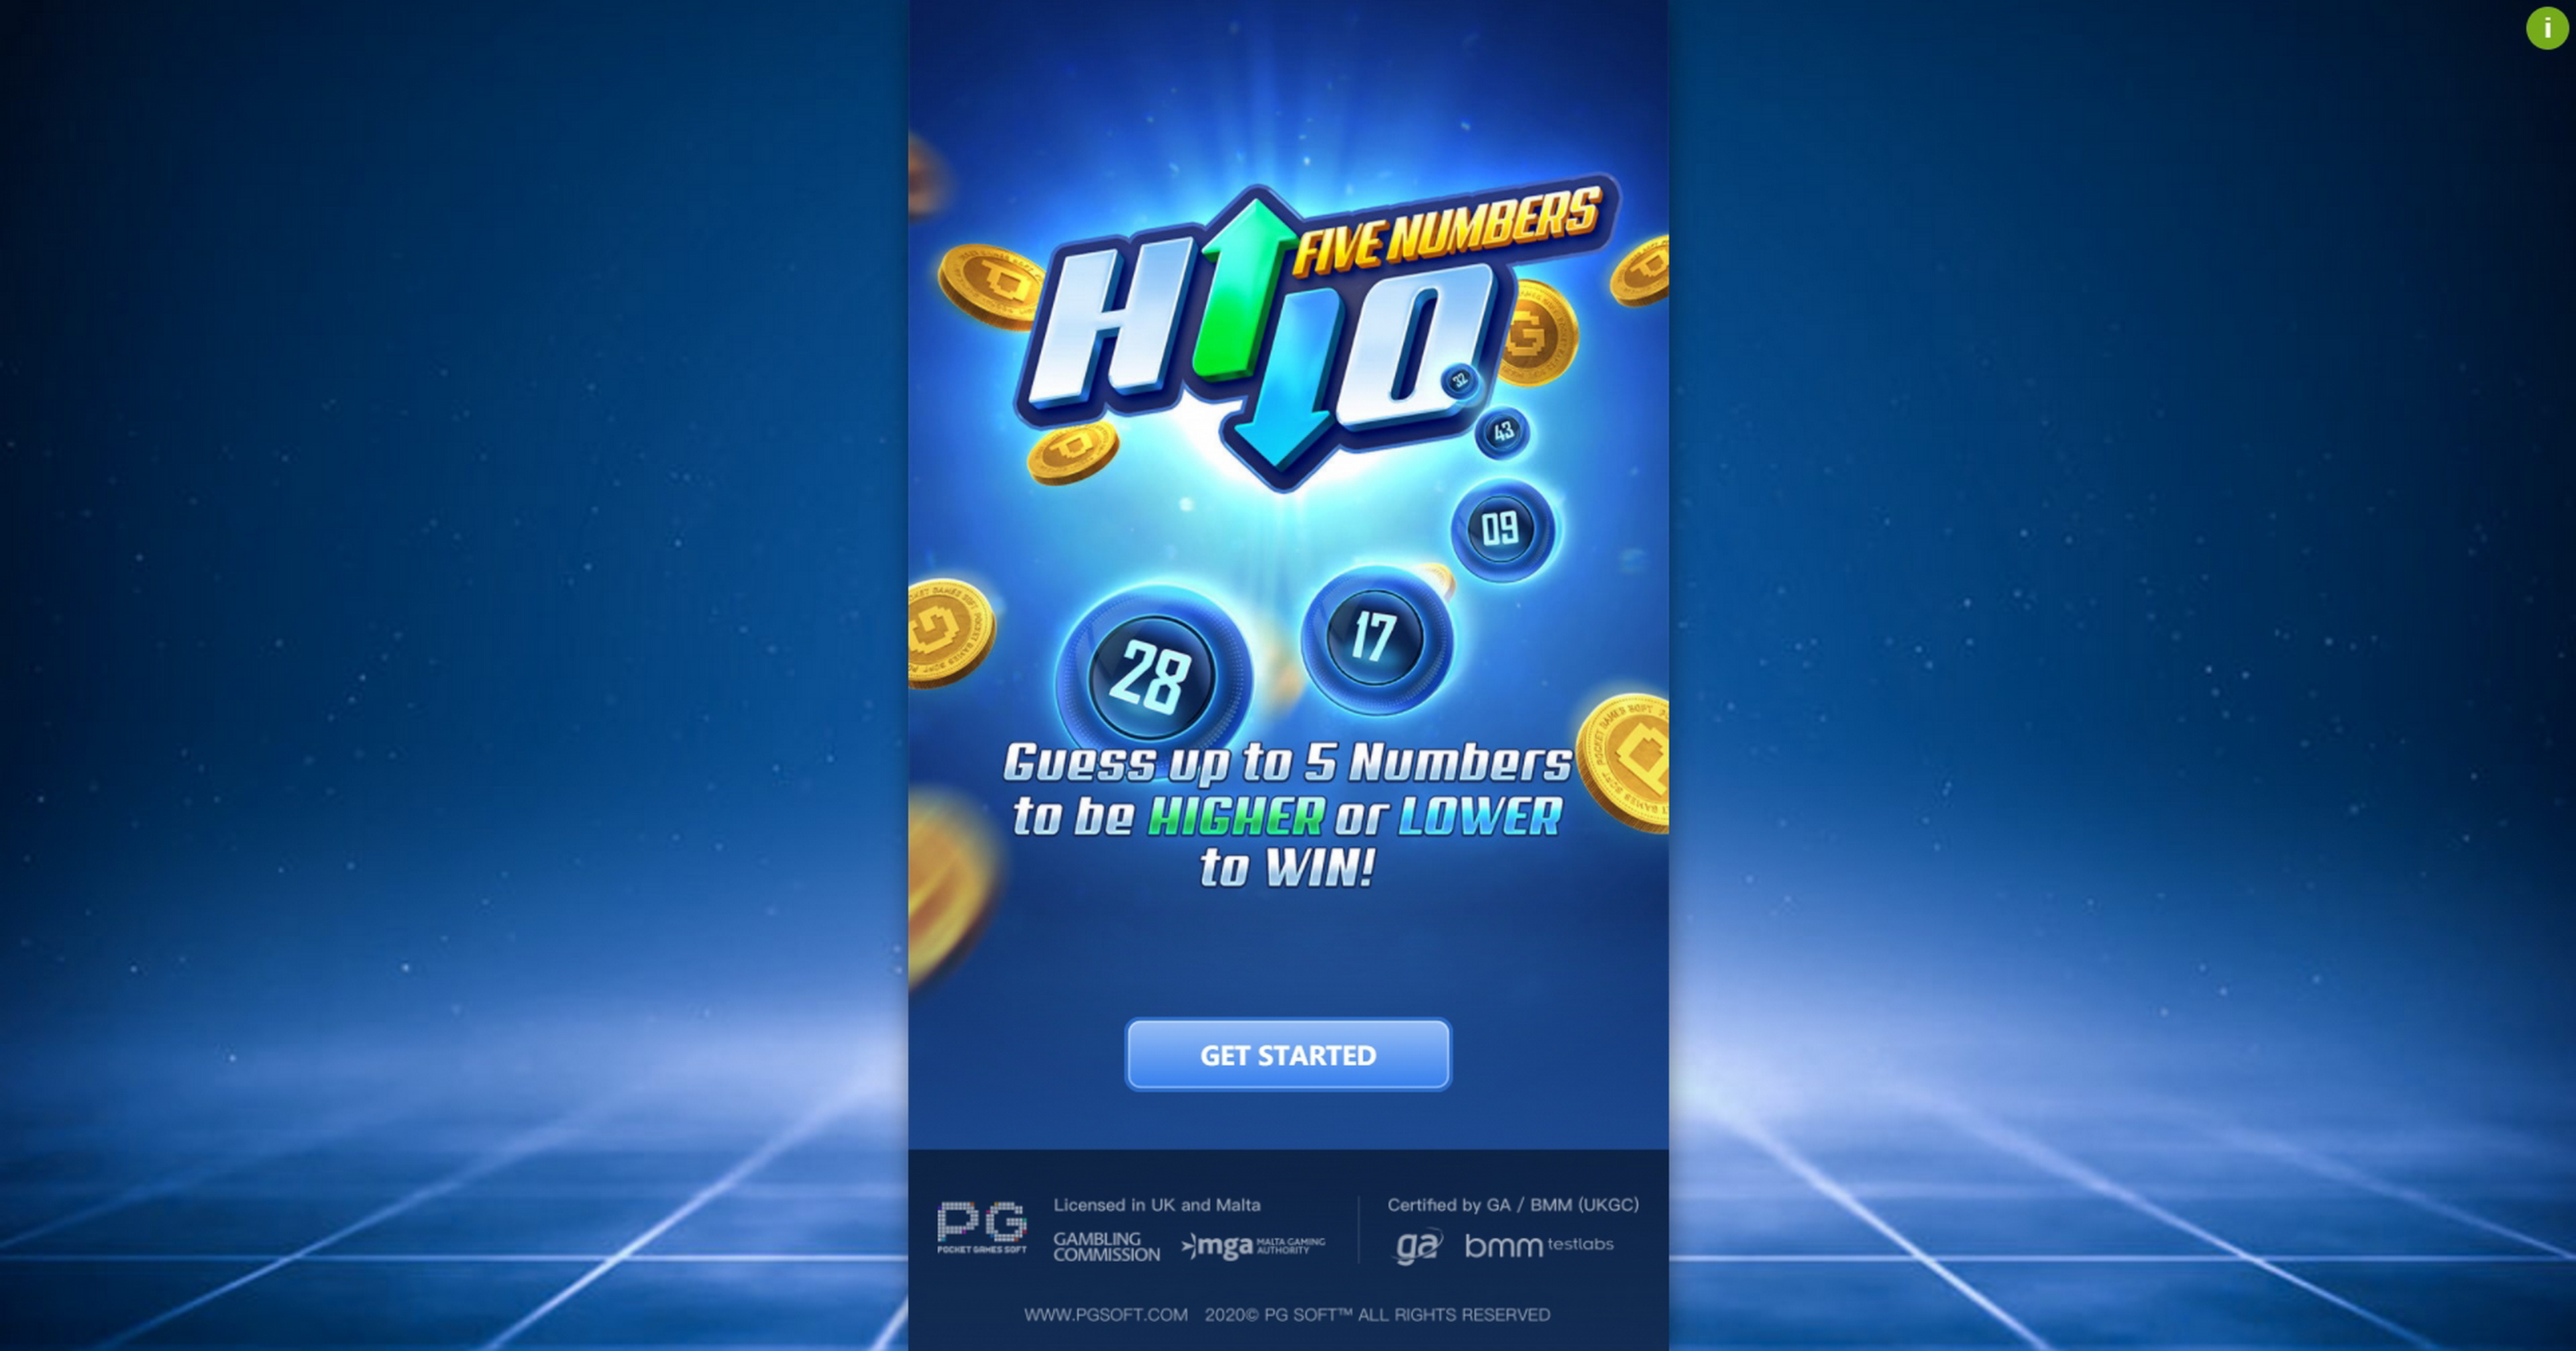 Play Five Numbers Hi Lo Free Casino Slot Game by PG Soft